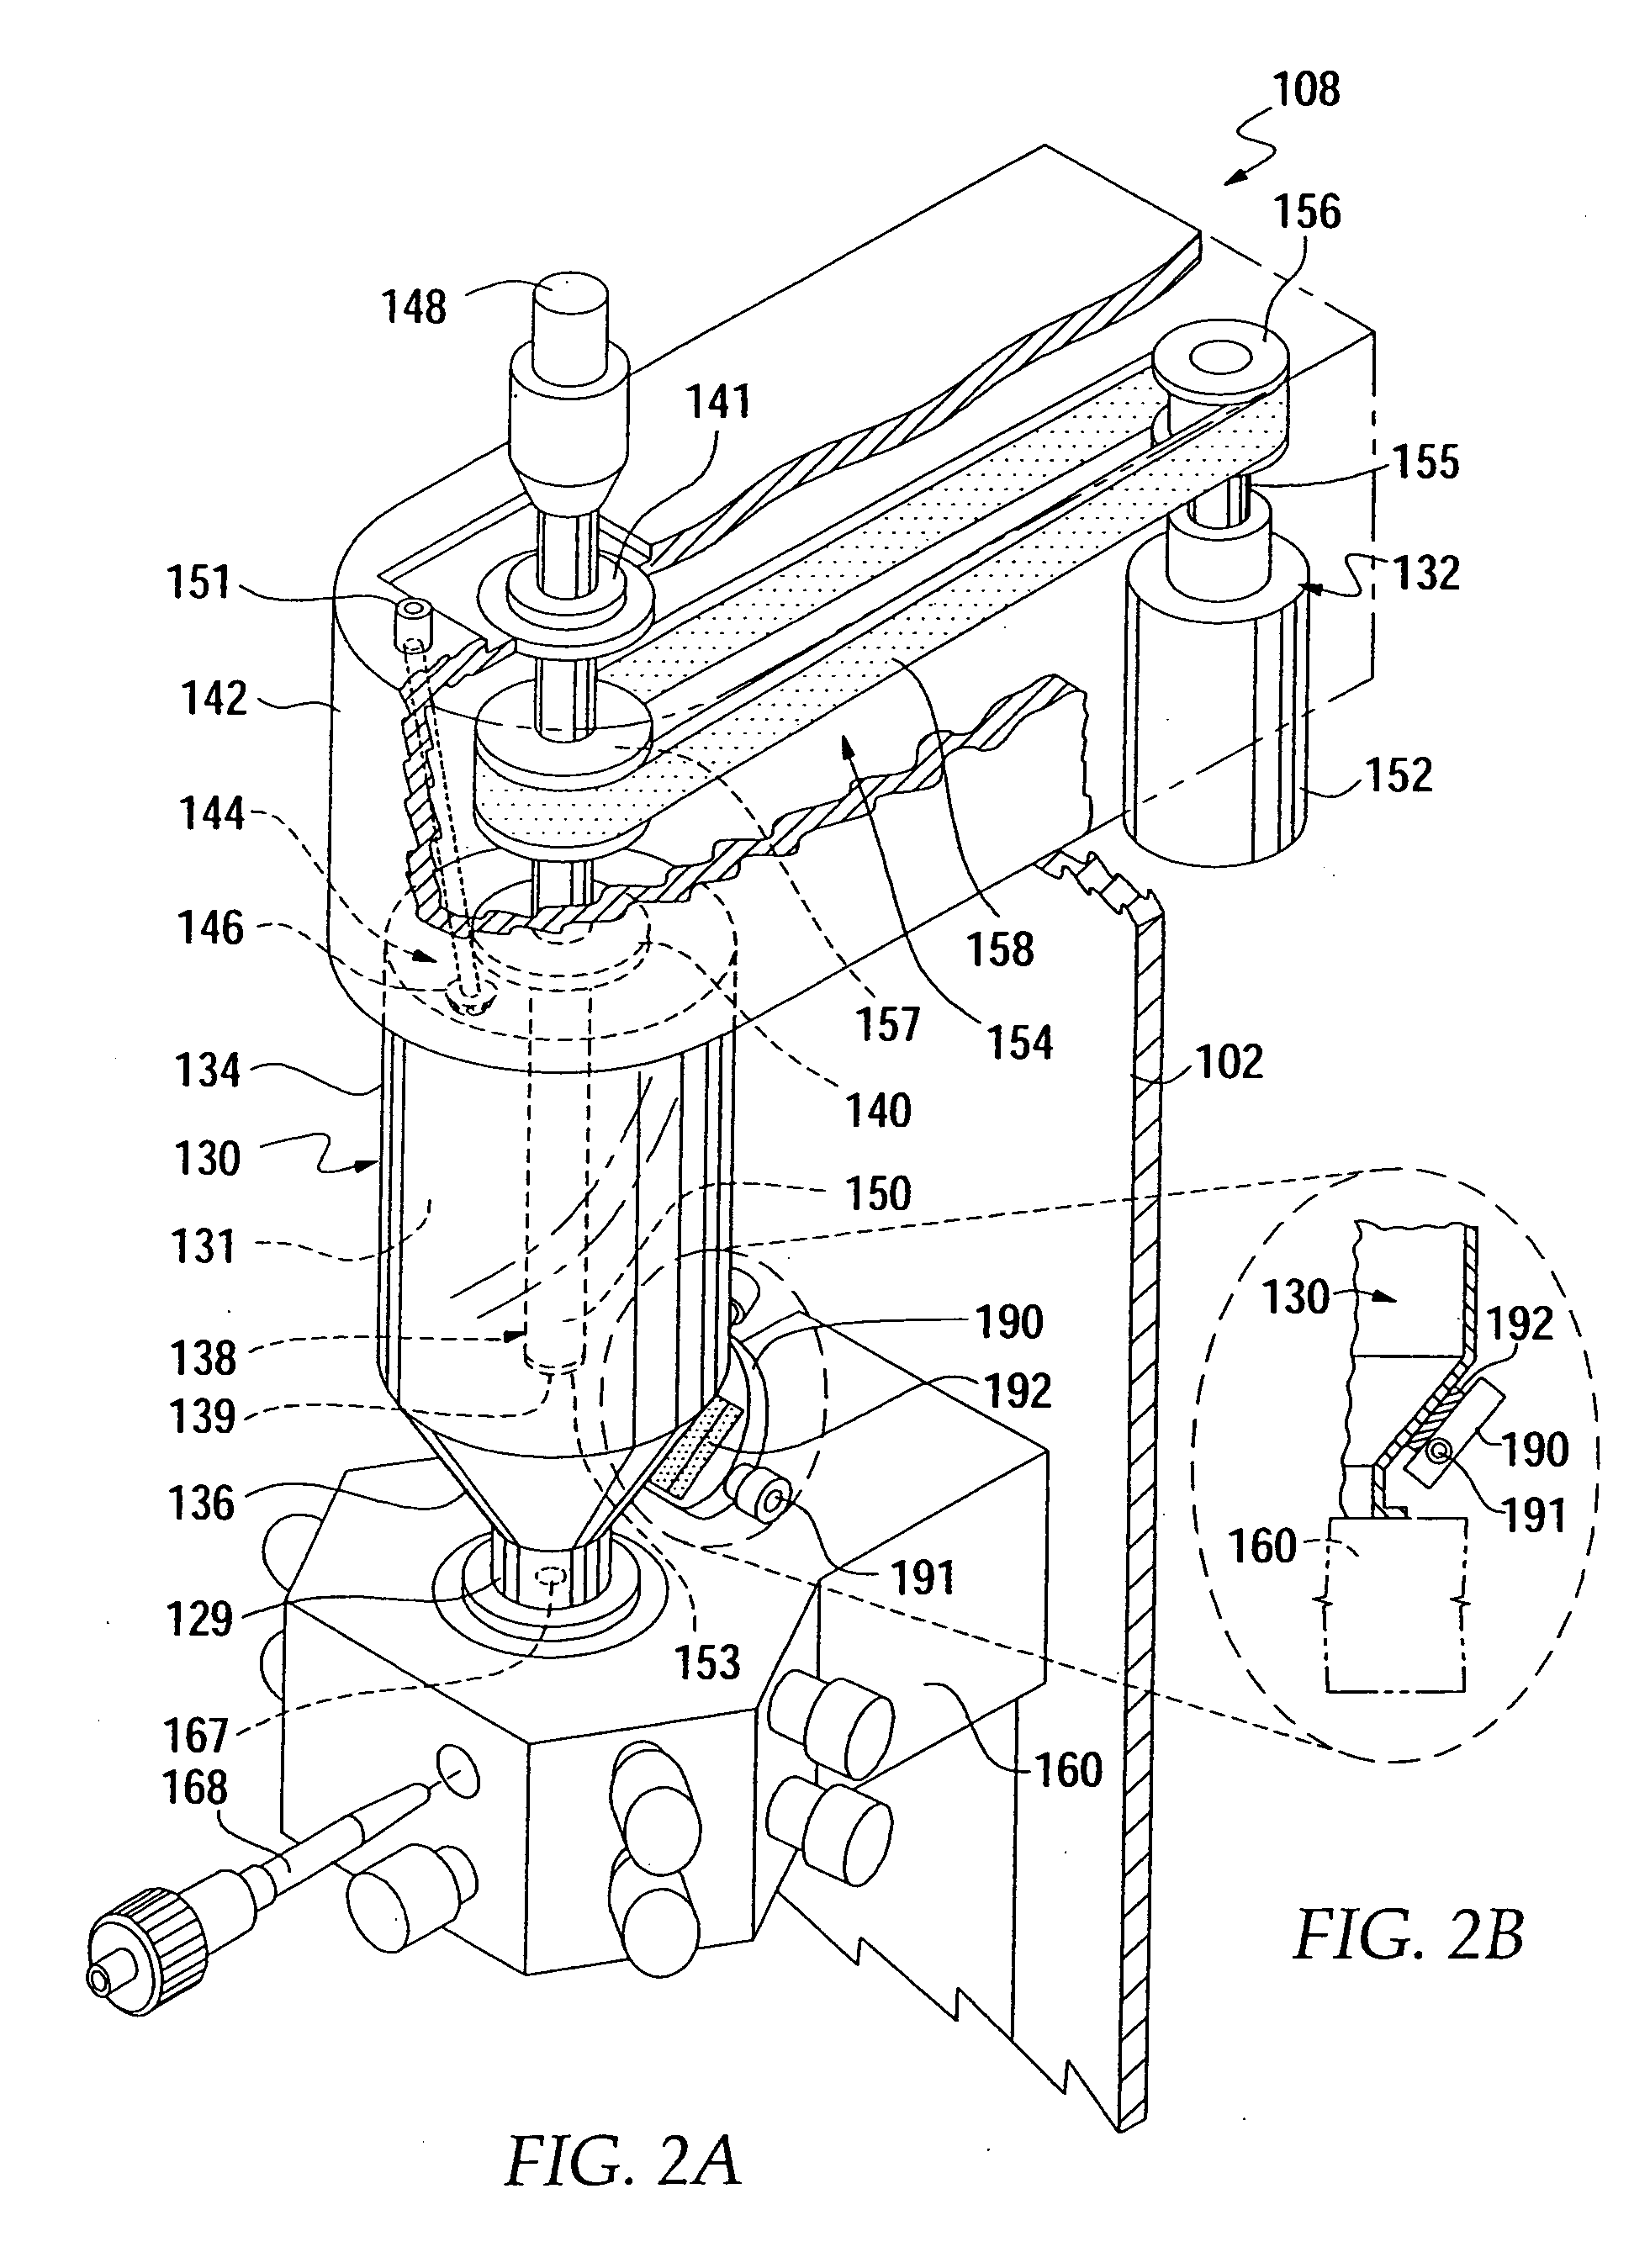 Apparatus and method for plating solution analysis